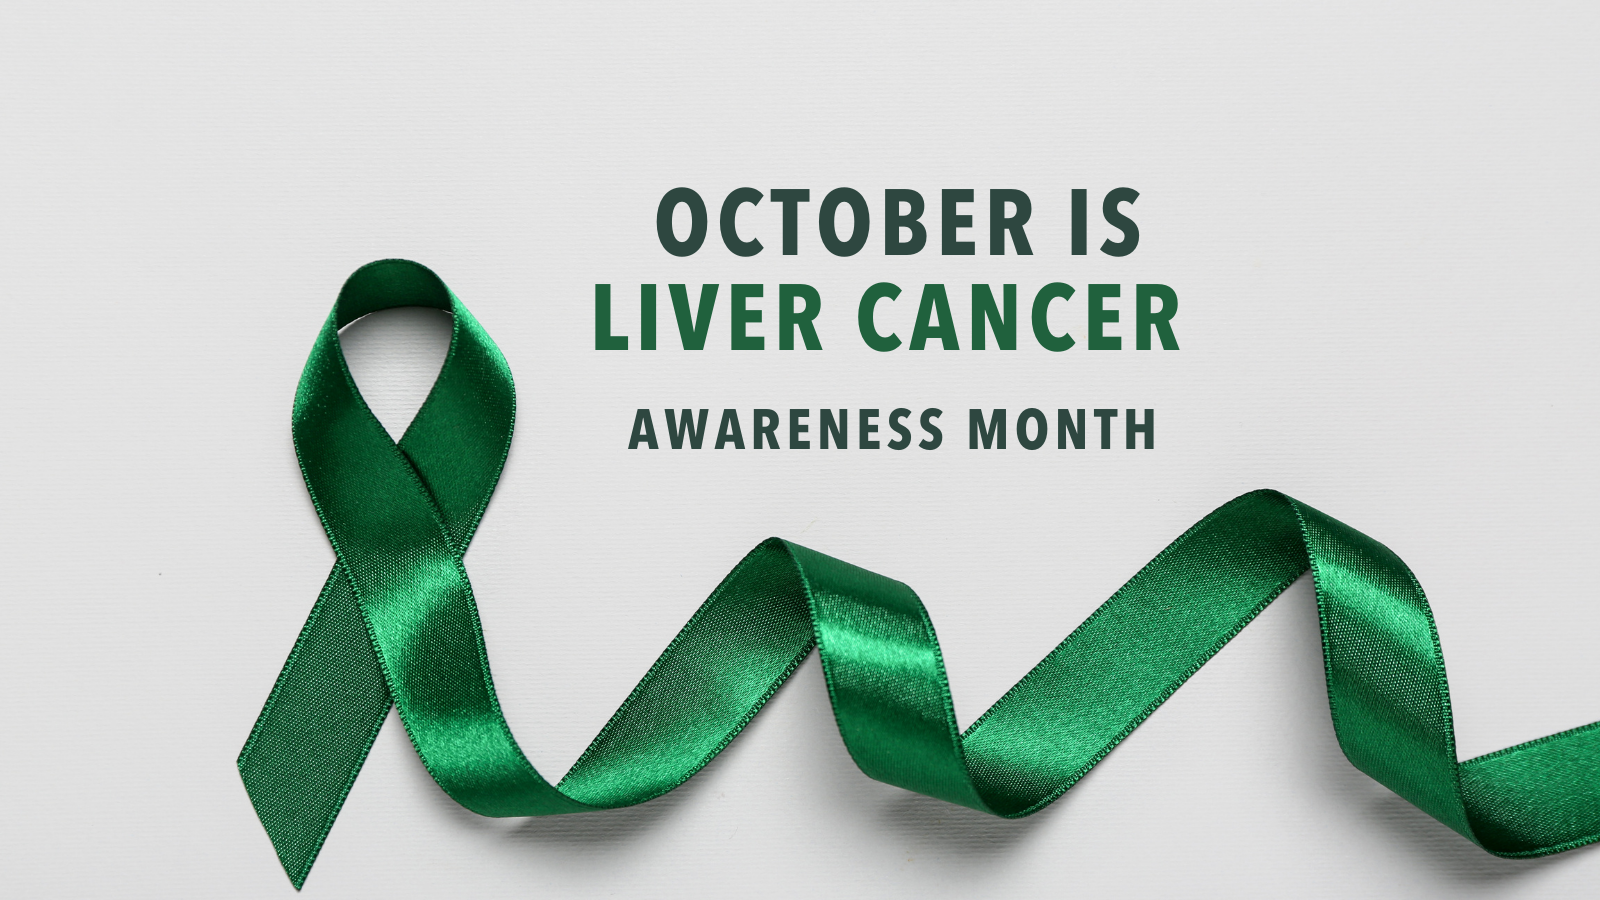 Dark green cancer ribbon below text stating: October is Liver Cancer Awareness Month